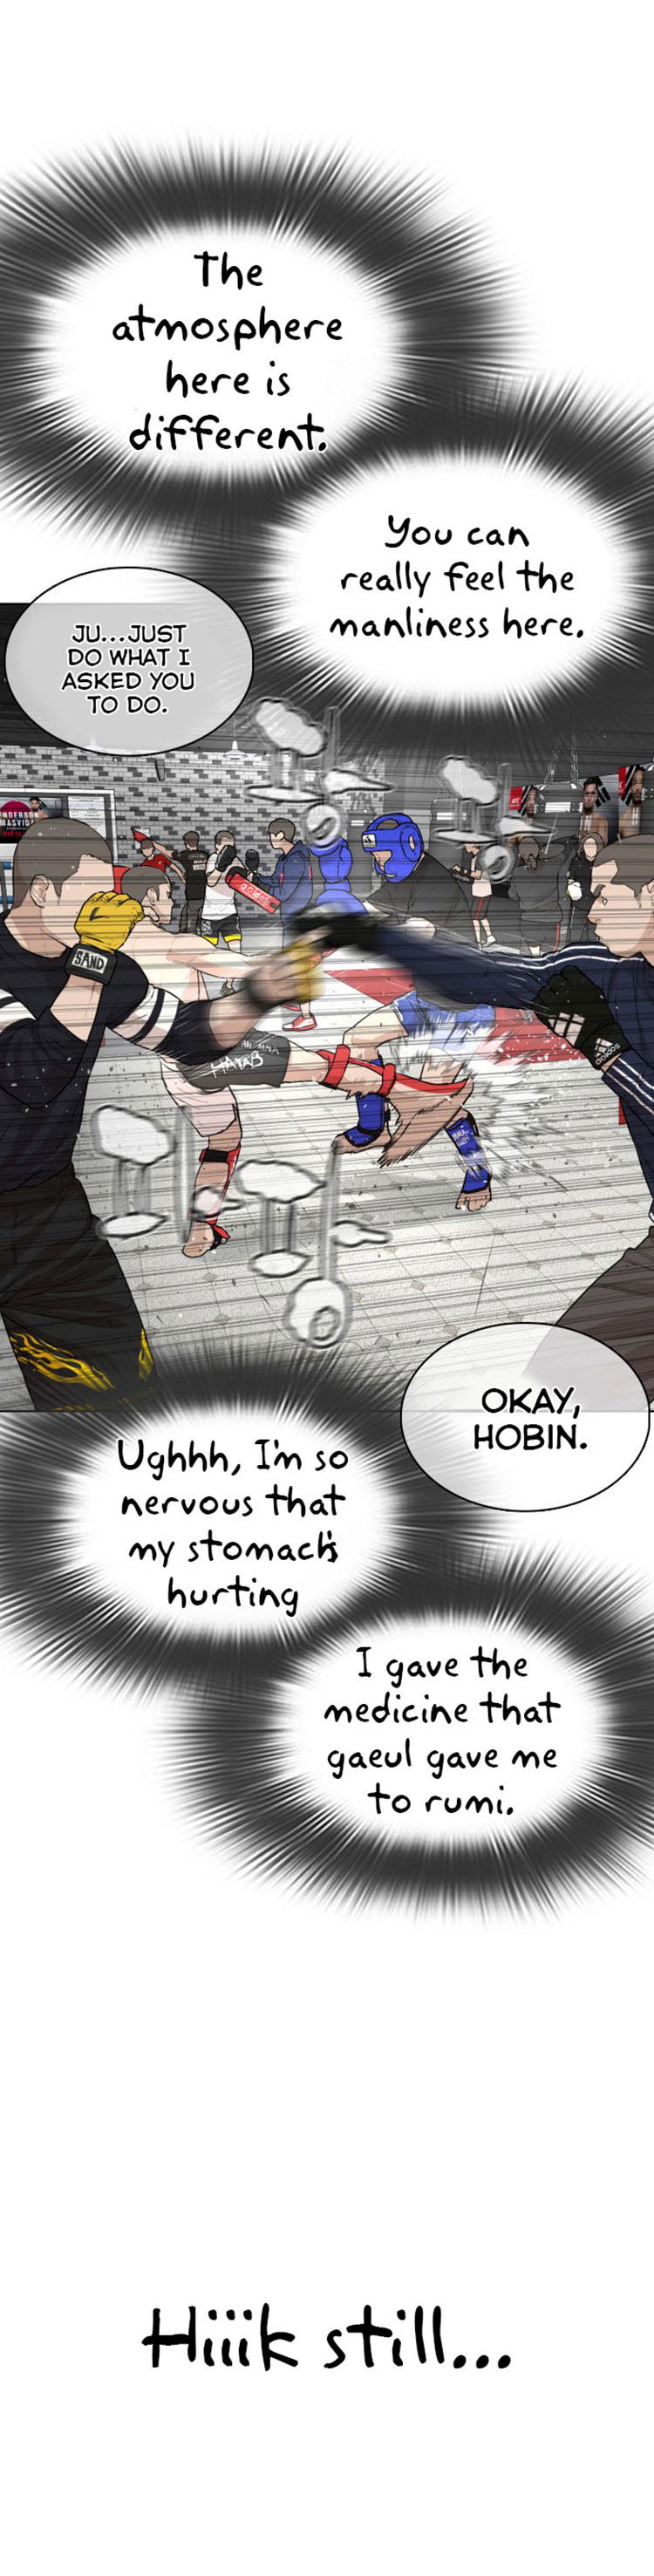 How To Fight Chapter 32  And Win Against Kickboxing page 13